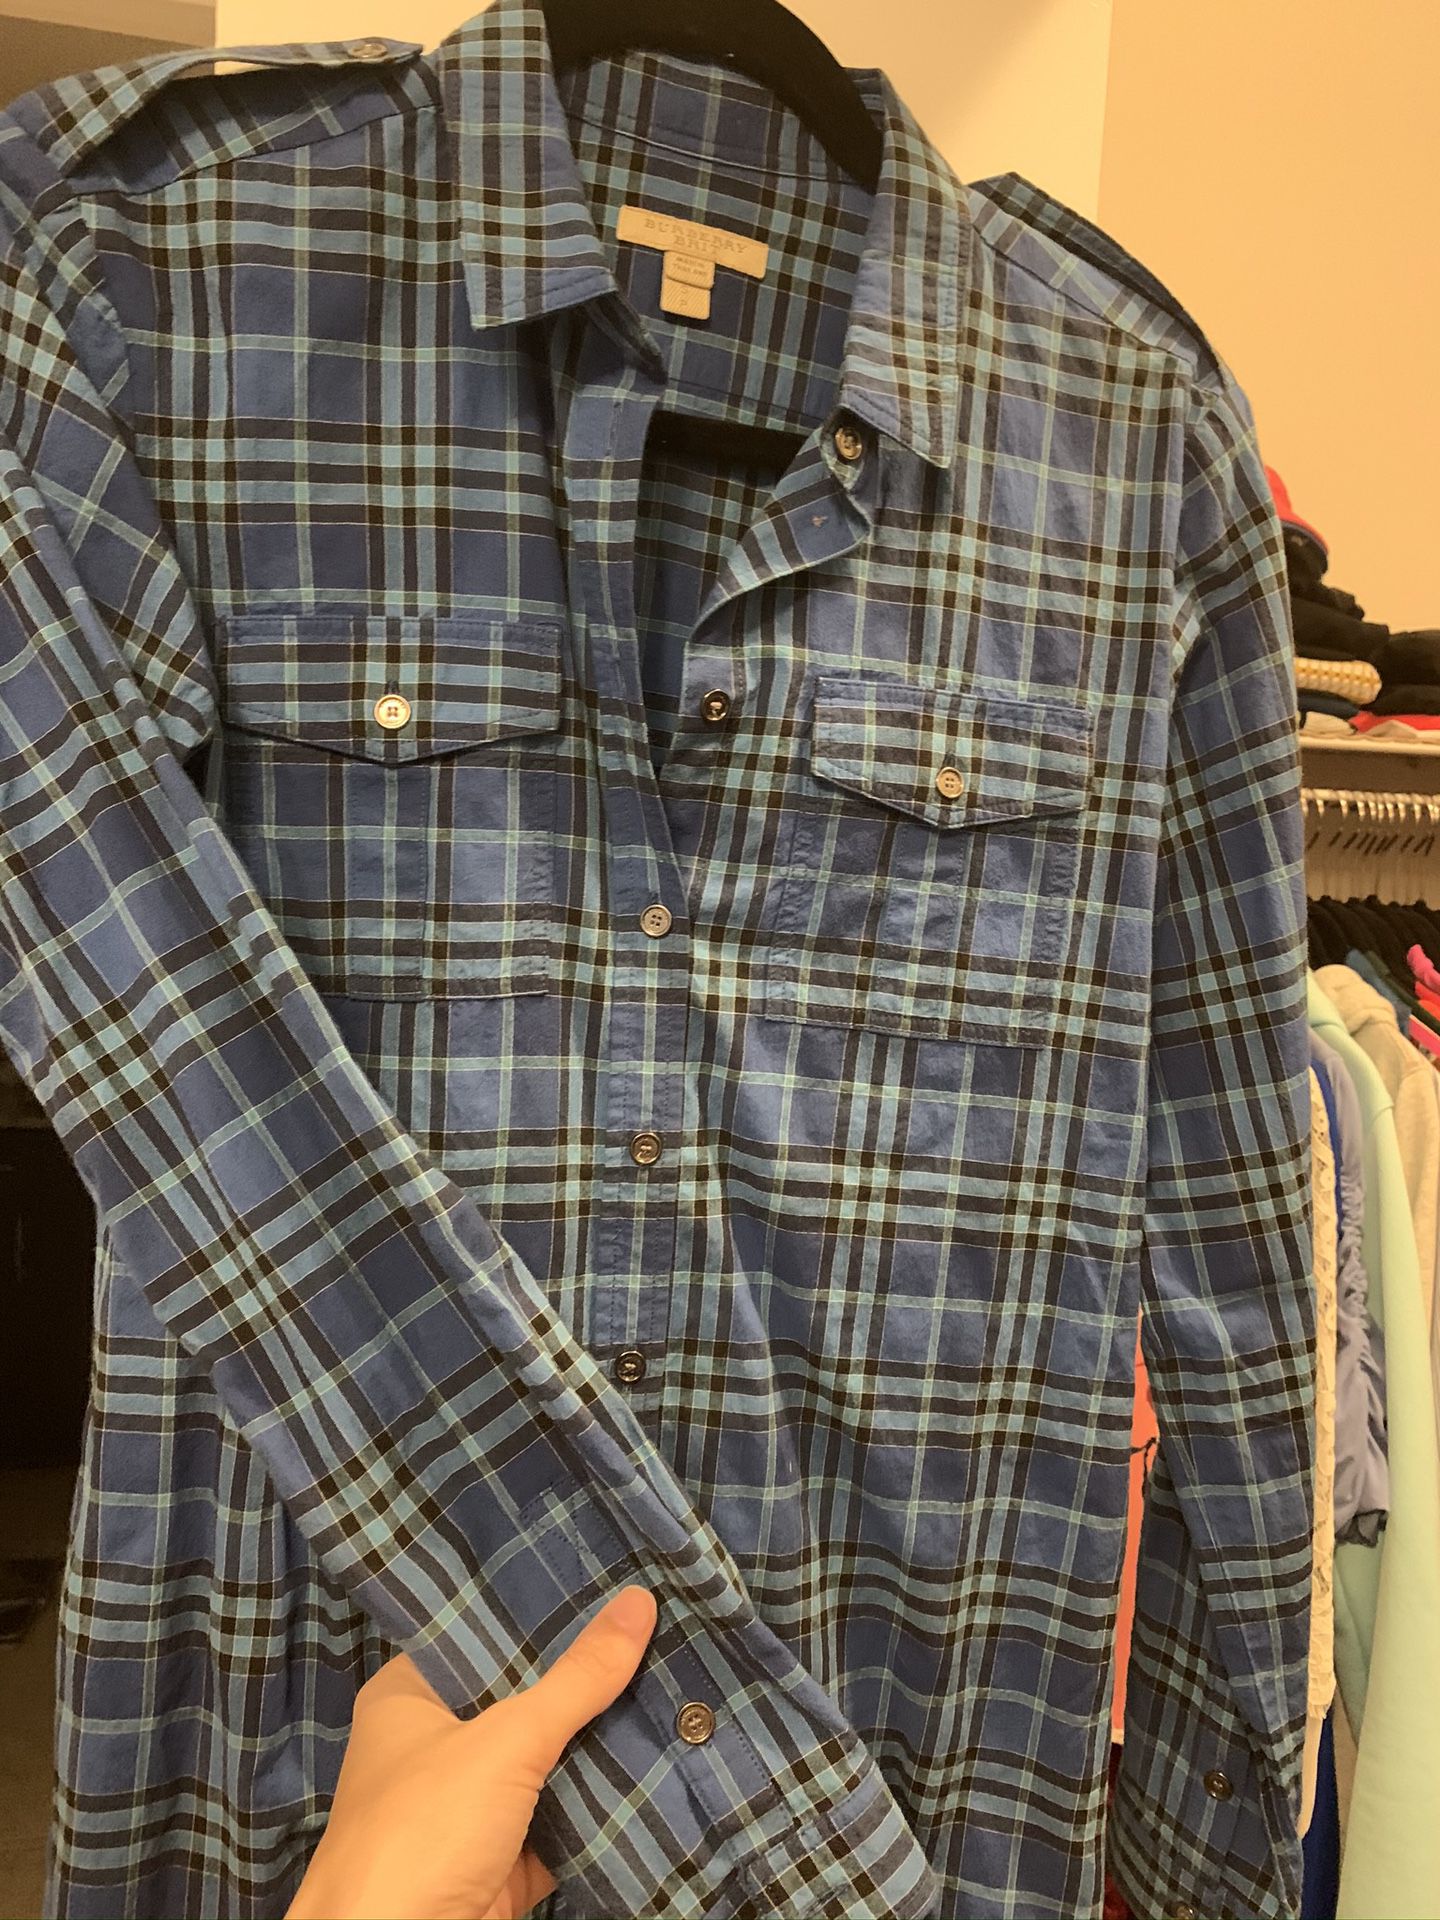 Women fitted Burberry Shirt -Blue Size Small (value $295)